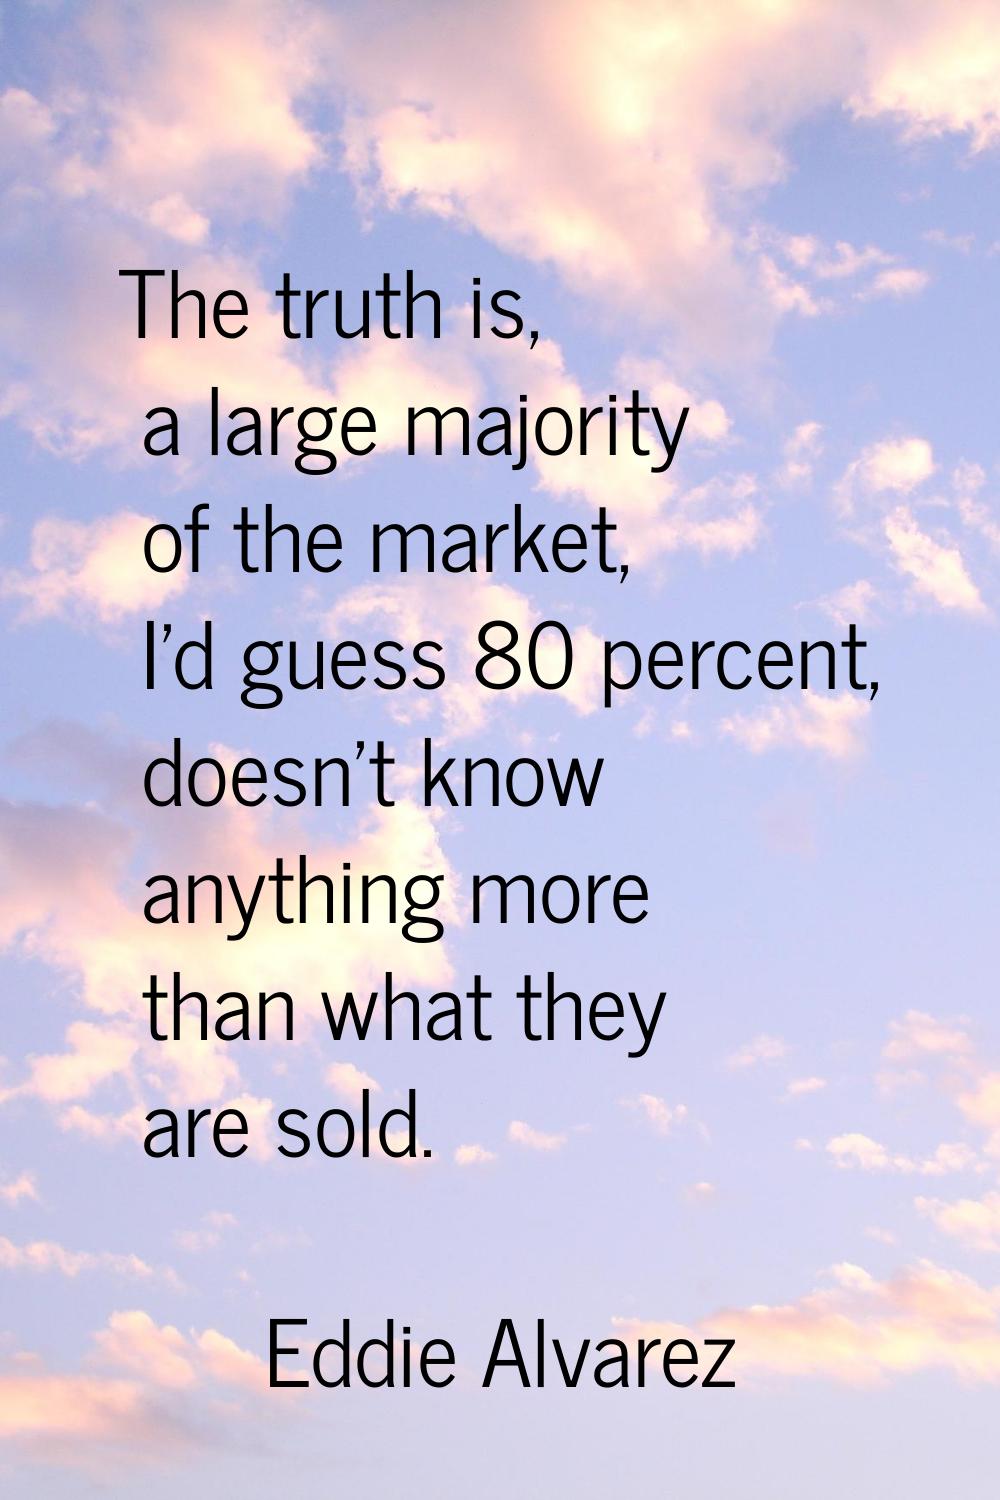 The truth is, a large majority of the market, I'd guess 80 percent, doesn't know anything more than